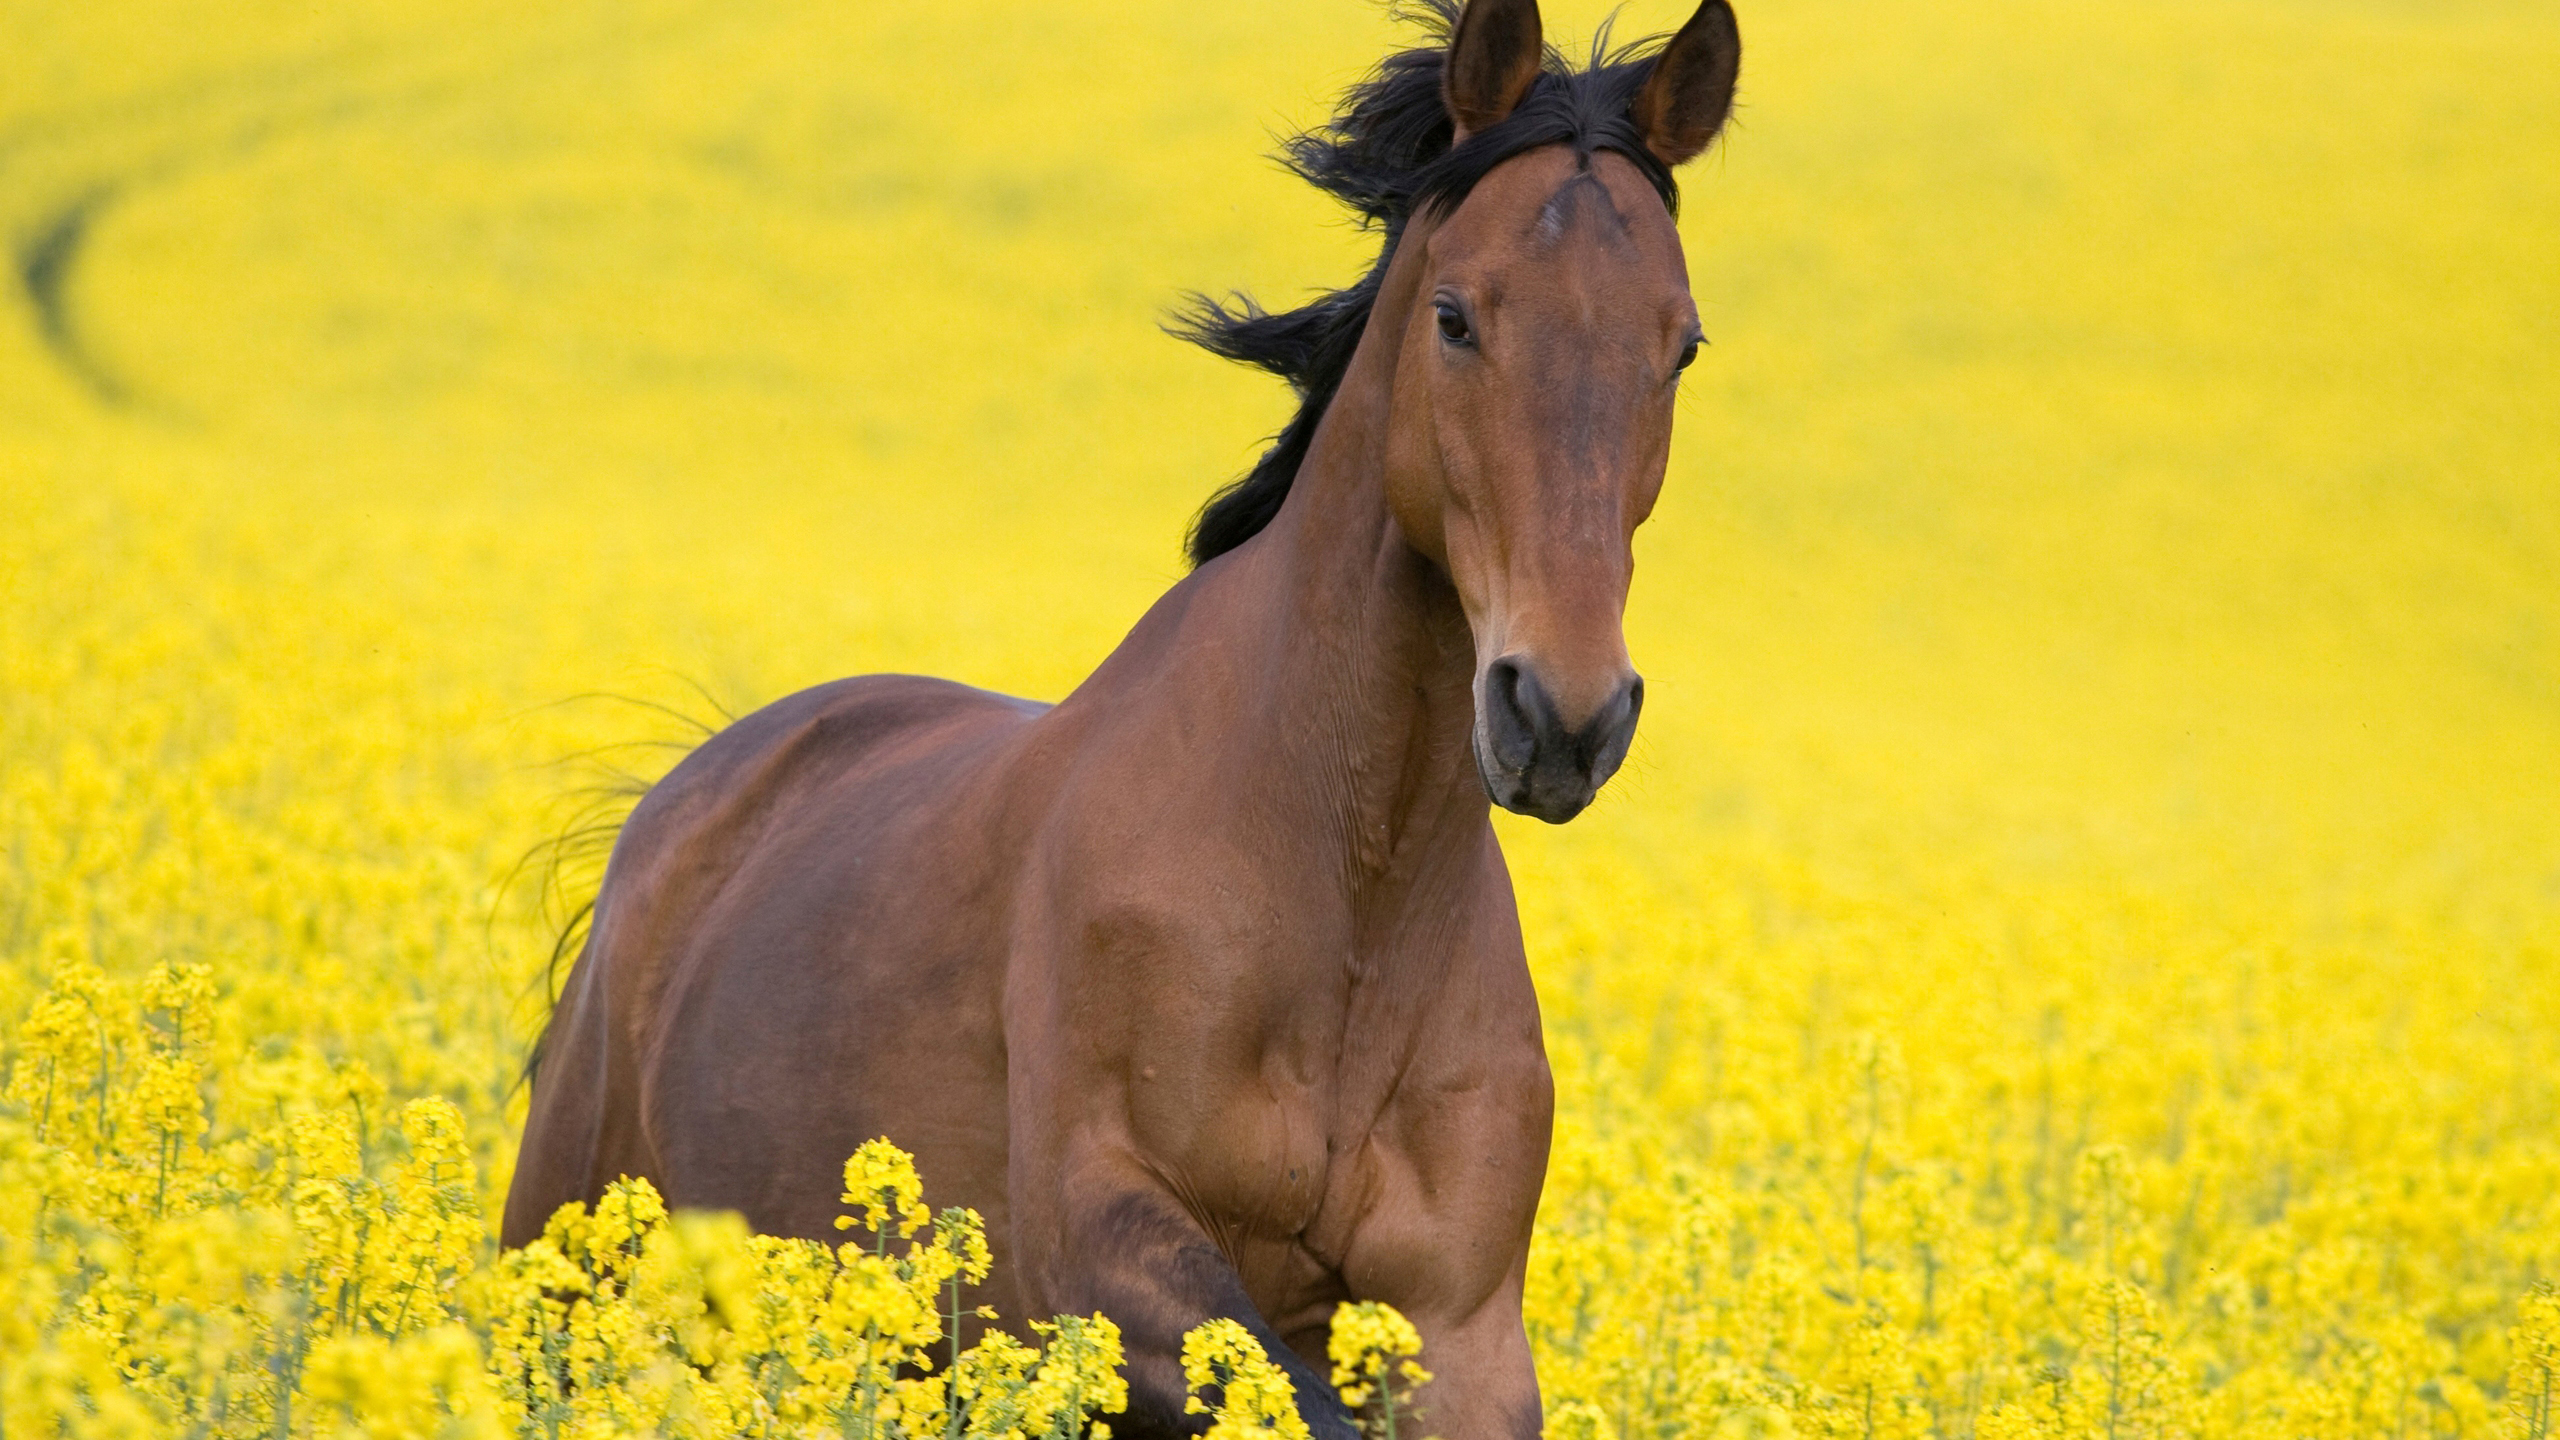 Brown Horse With Wallpaper Of Yellow Flowers 2K Horse